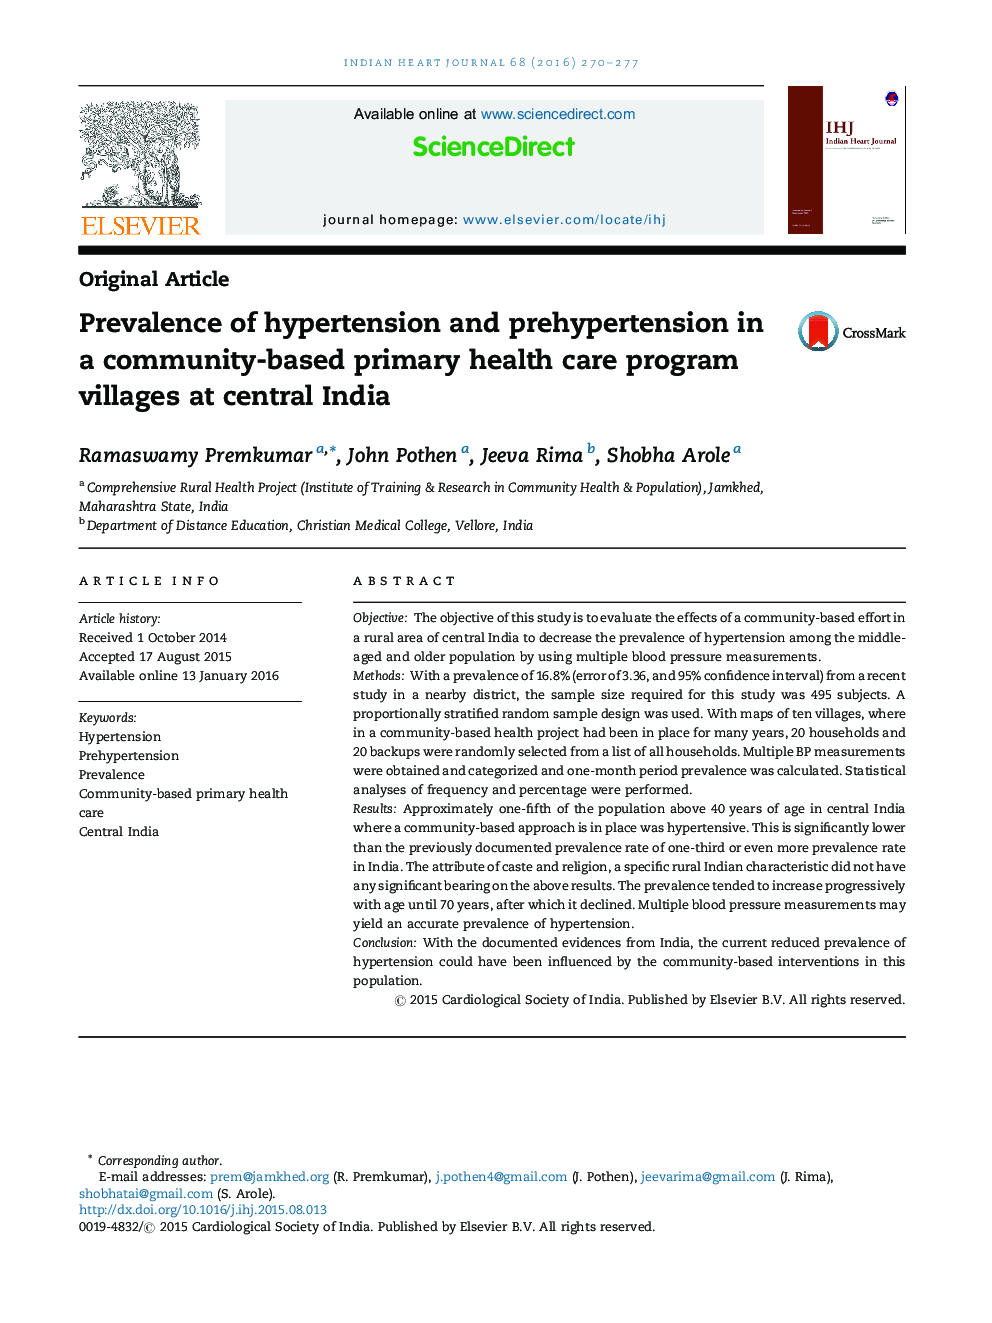 Prevalence of hypertension and prehypertension in a community-based primary health care program villages at central India